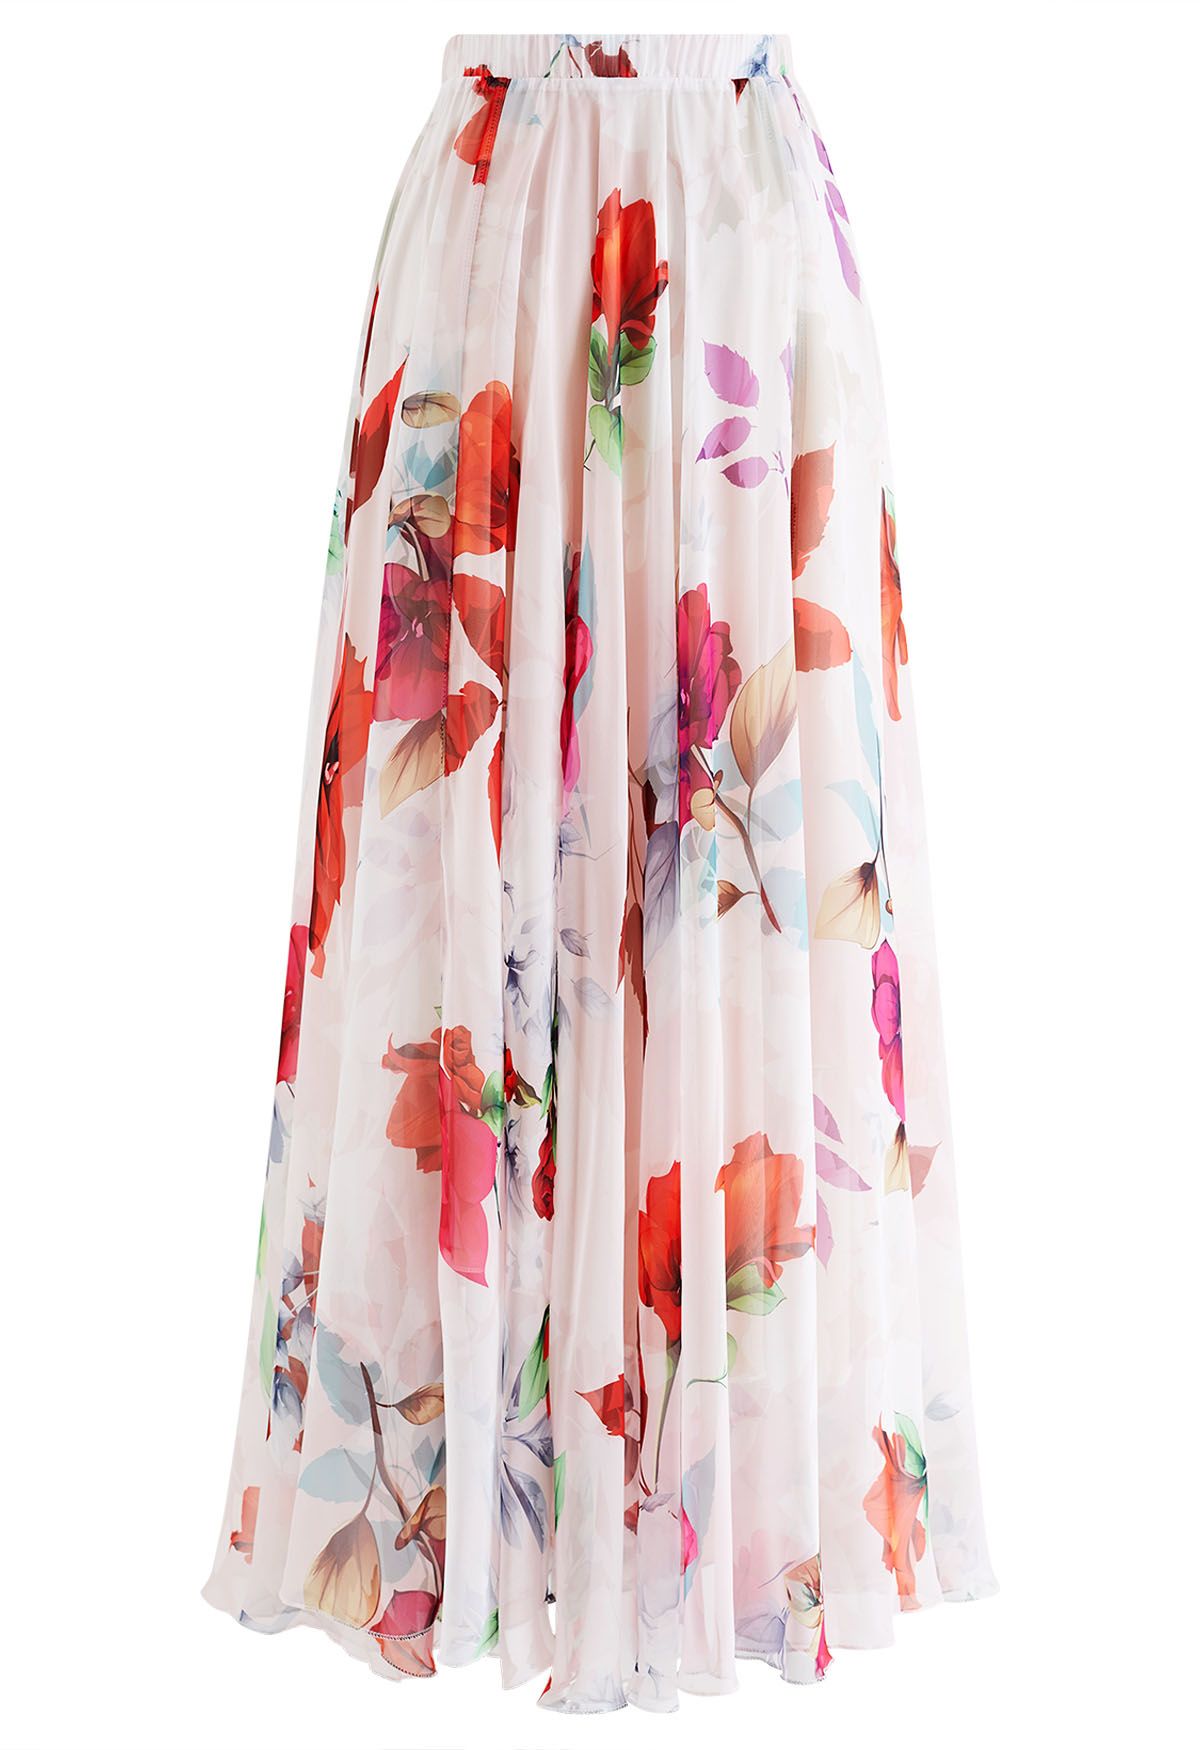 Best Blooms Rose Printed Chiffon Maxi Skirt in Blush - Retro, Indie and ...